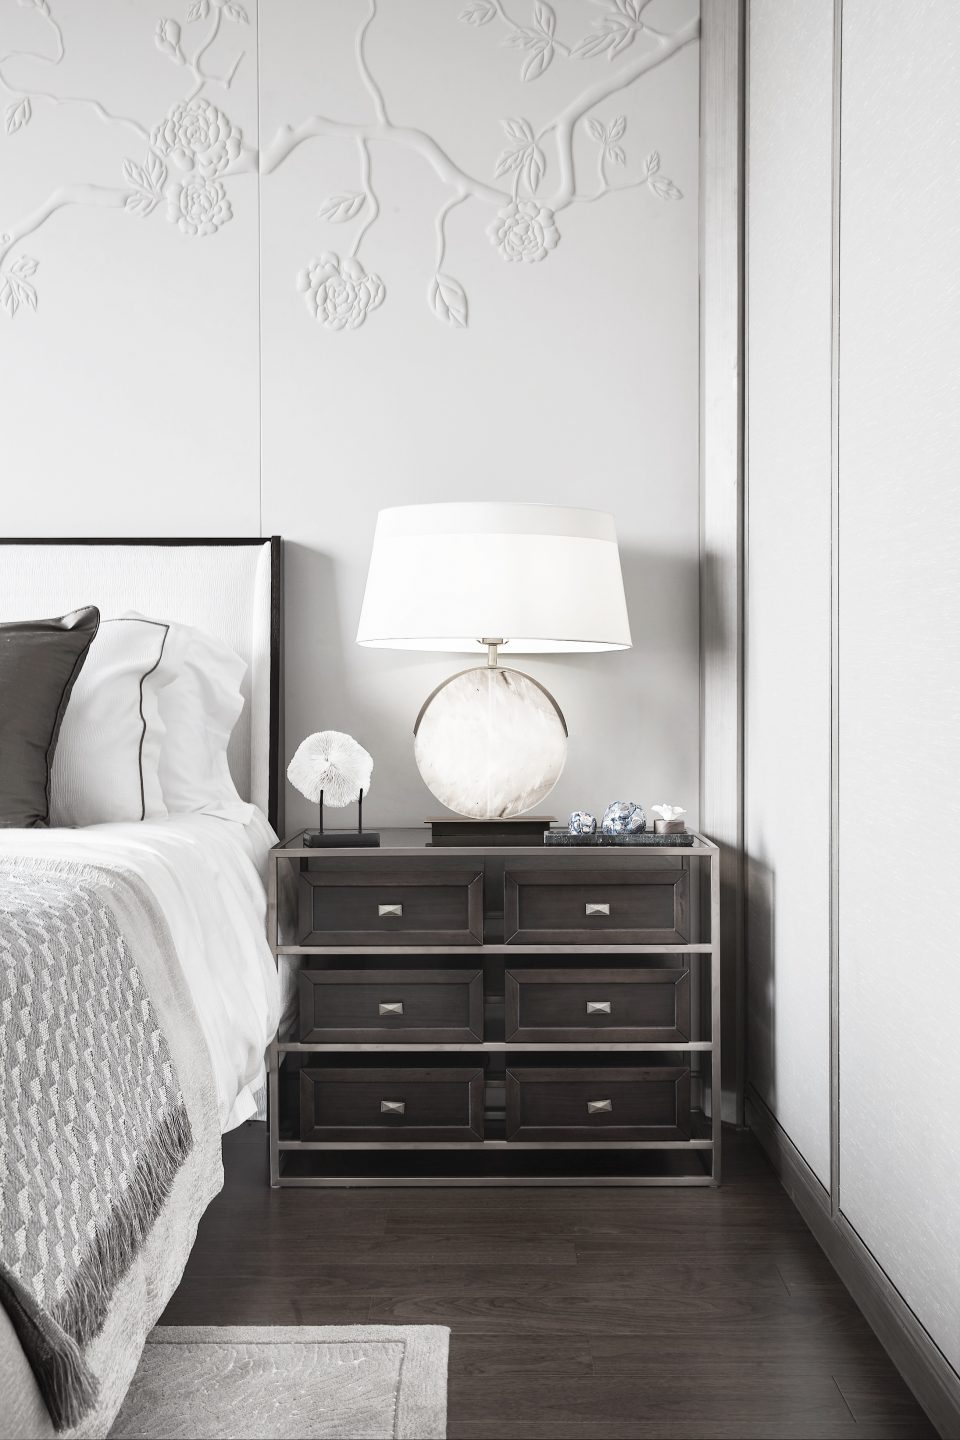 Master bedroom detail shot with textured wall and sideboard